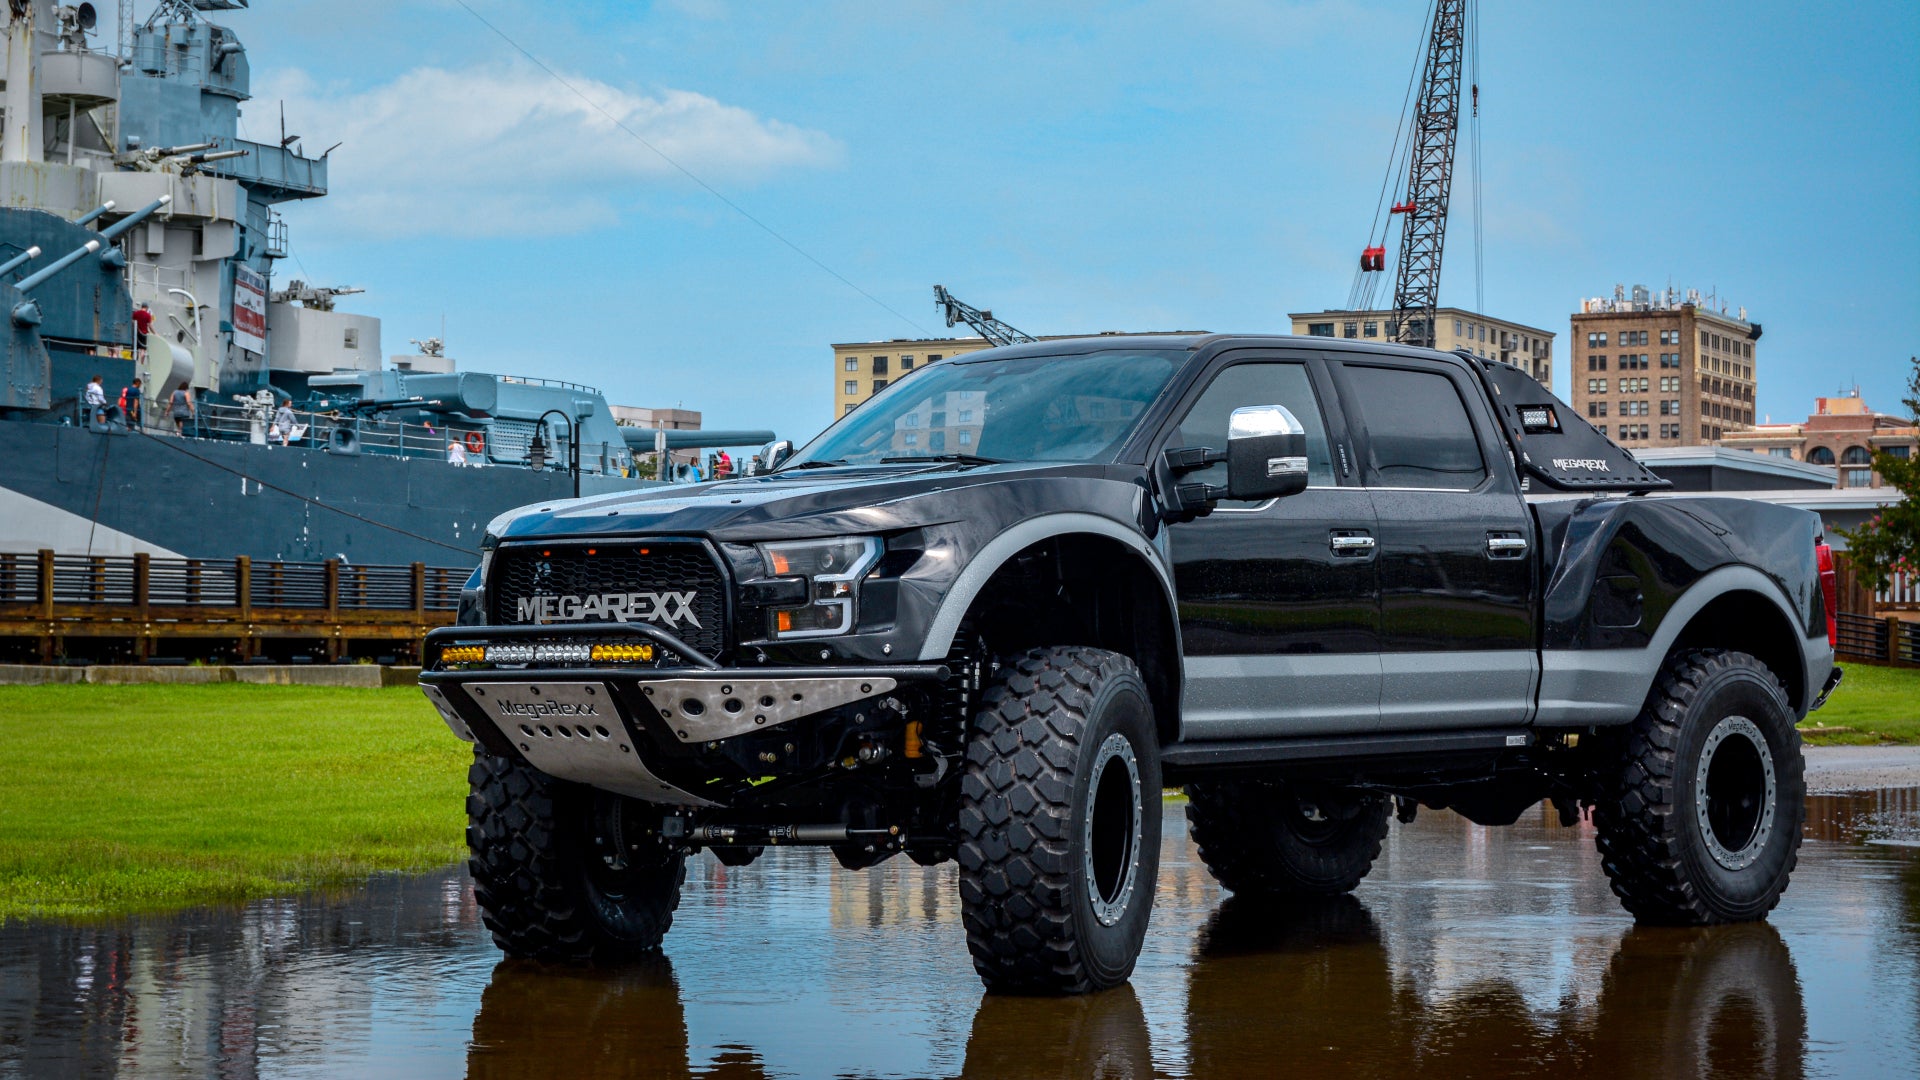 The MegaRexx MegaRaptor is a Ford F-250 On Equine Growth Hormone - The Drive